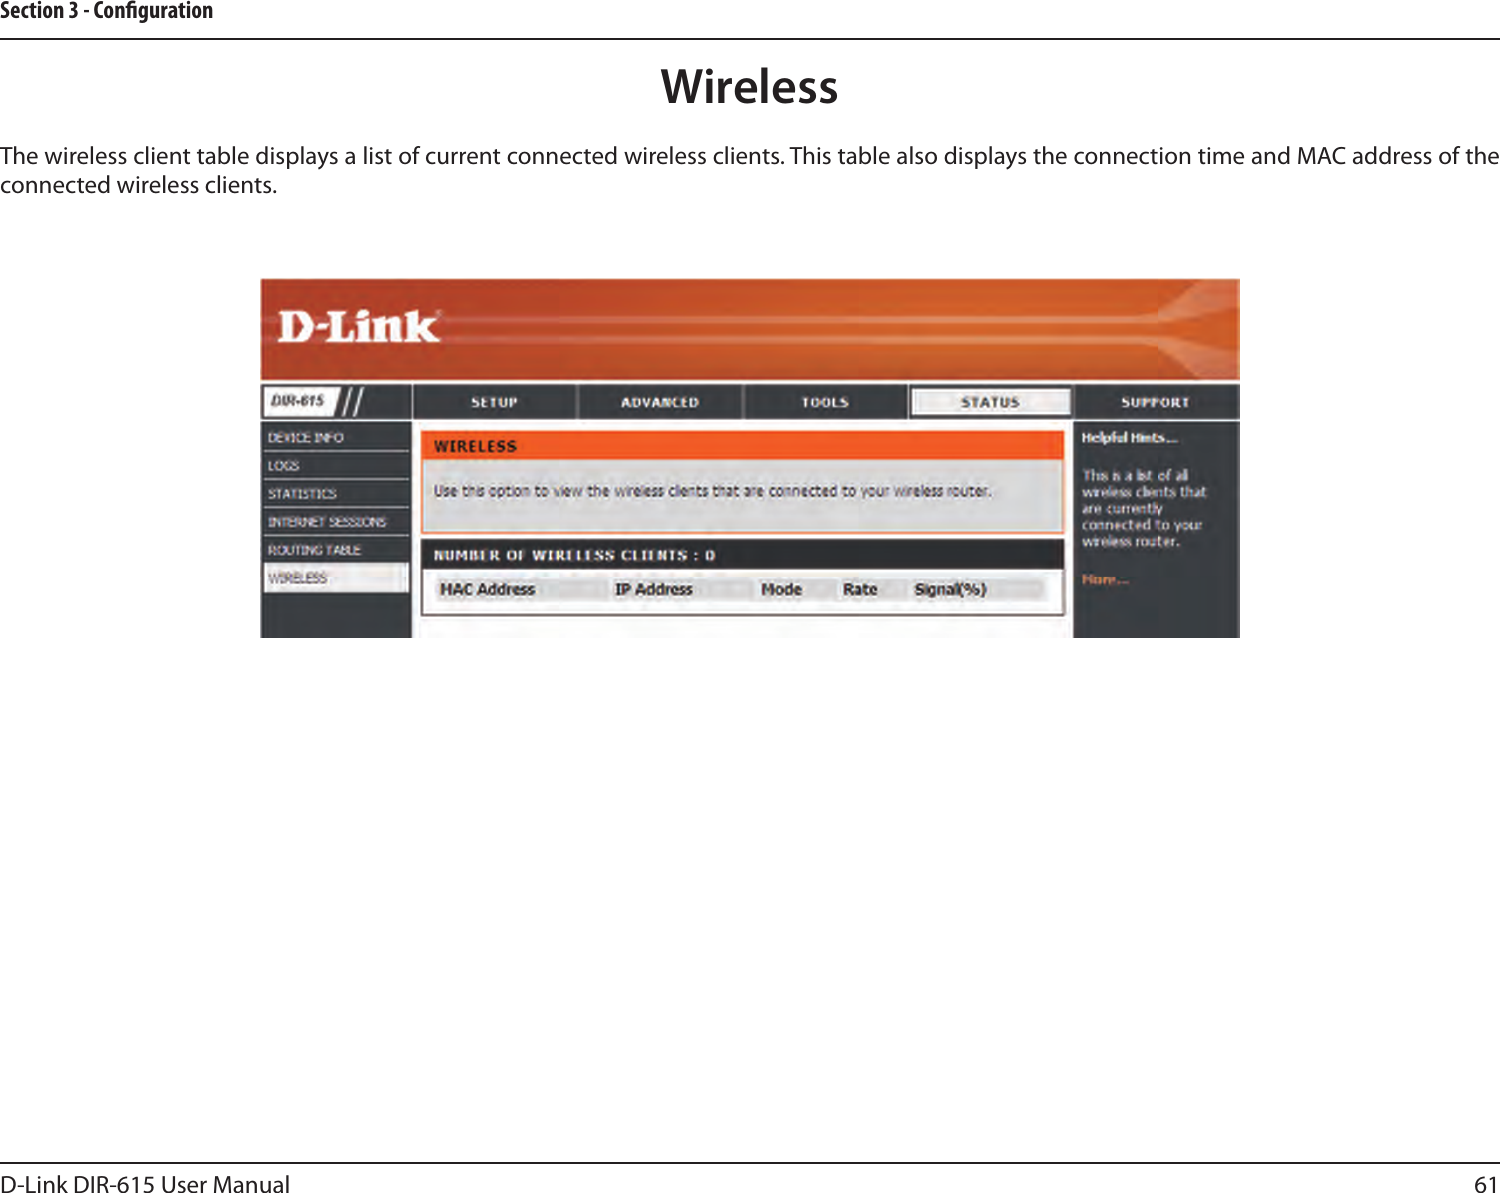 61D-Link DIR-615 User ManualSection 3 - CongurationThe wireless client table displays a list of current connected wireless clients. This table also displays the connection time and MAC address of the connected wireless clients.Wireless